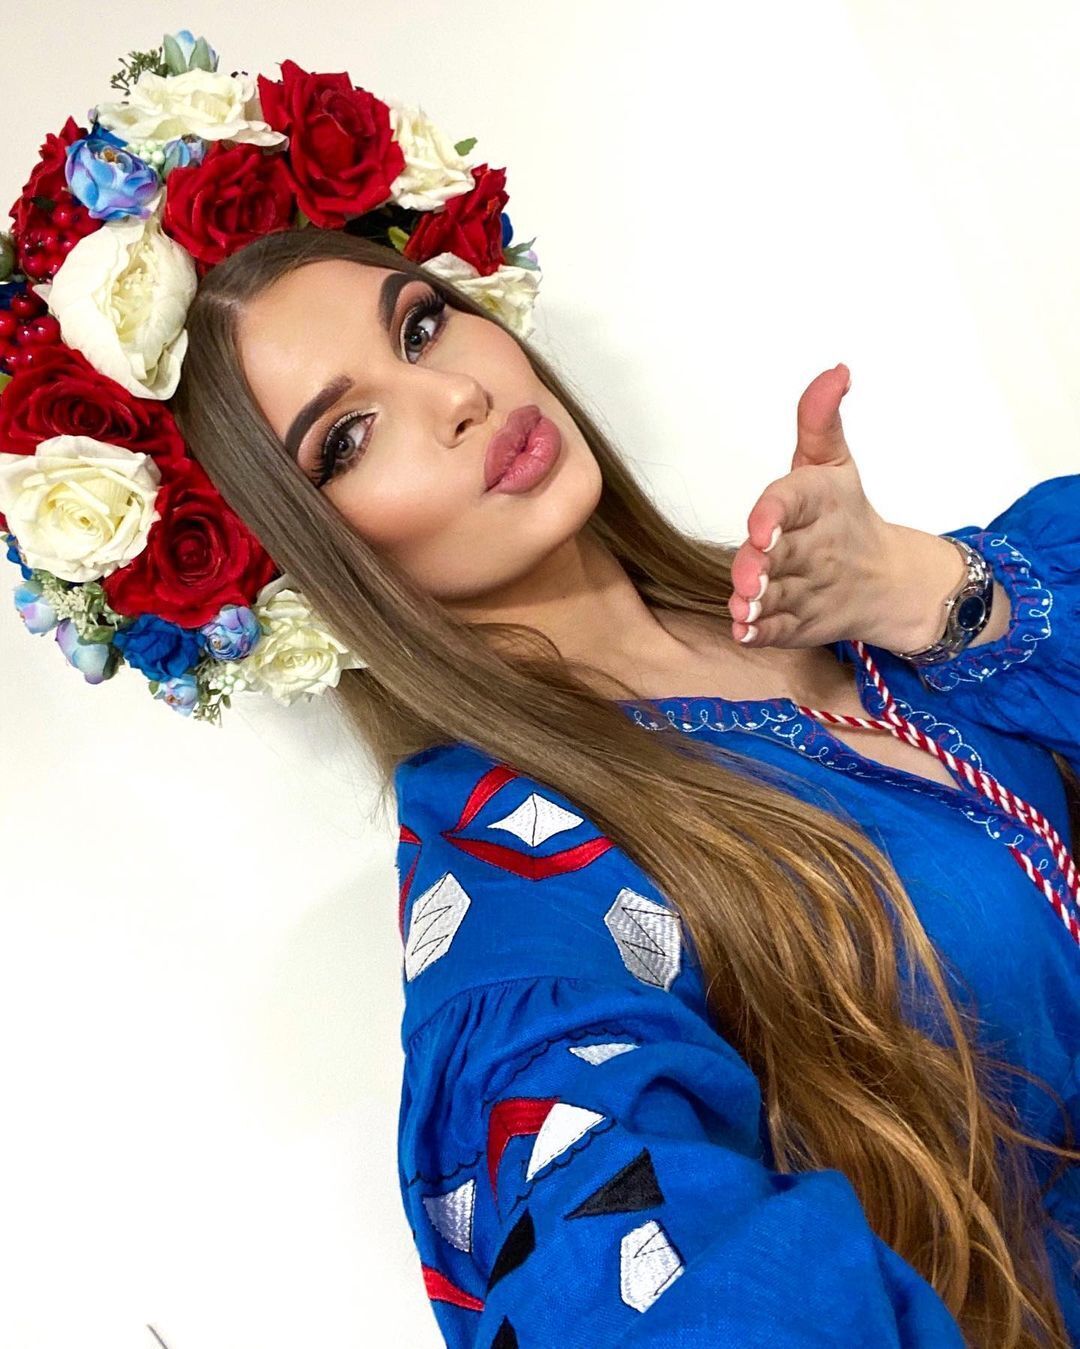 Ukrainian girl was recognized as the most beautiful in Europe: who is Yulia Karpets and how she looks like. Photo